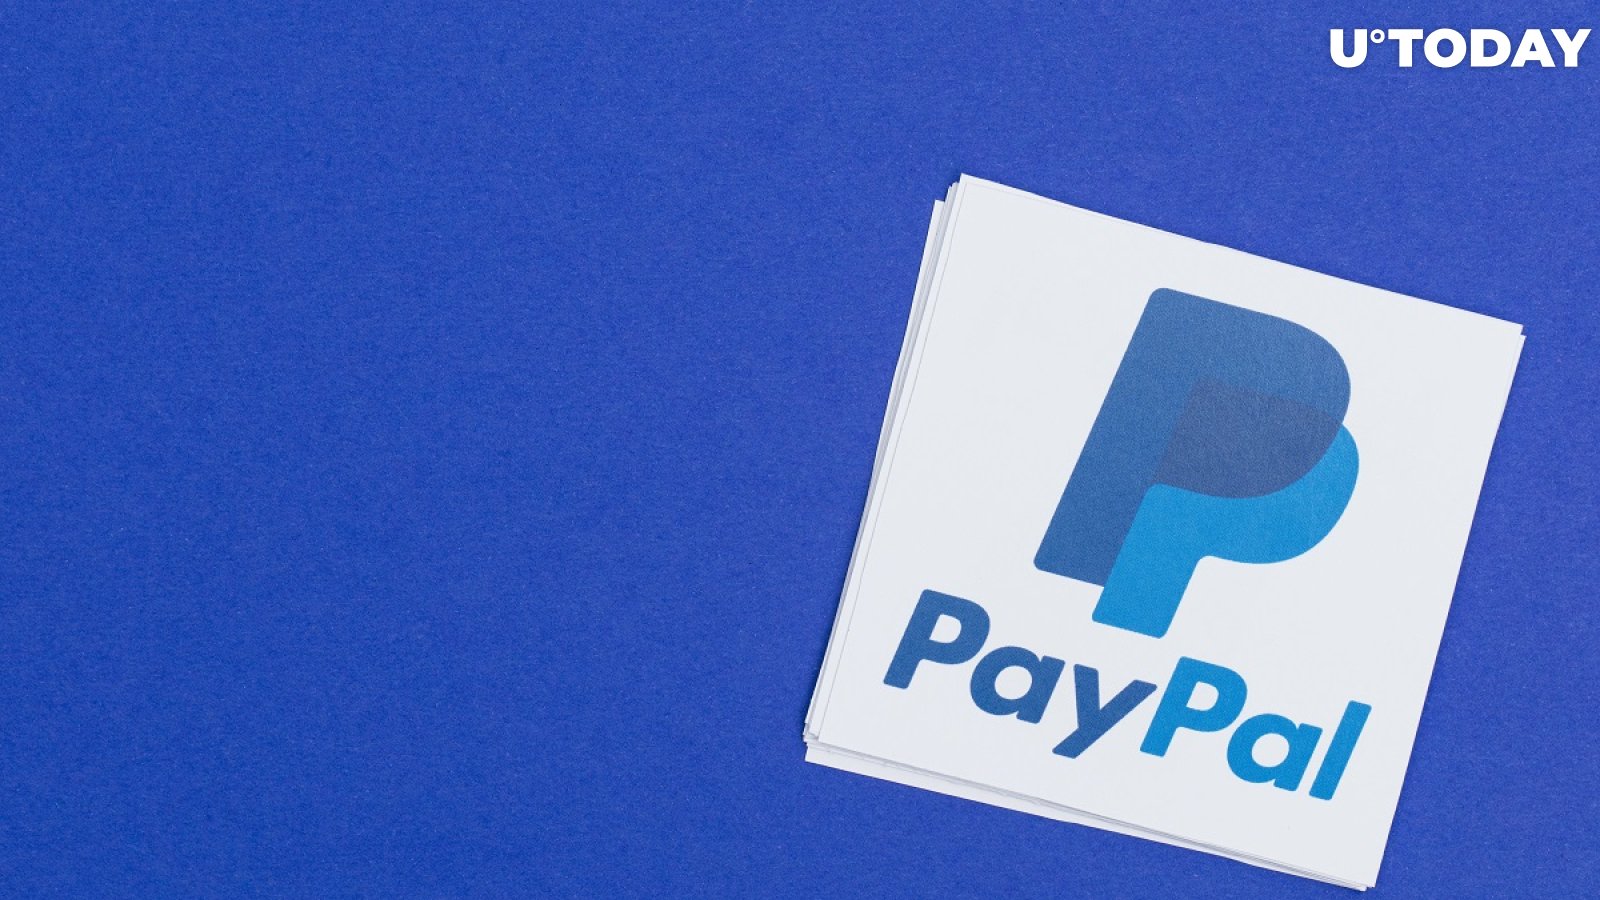 PayPal Dramatically Increases Limit for Cryptocurrency Purchases 